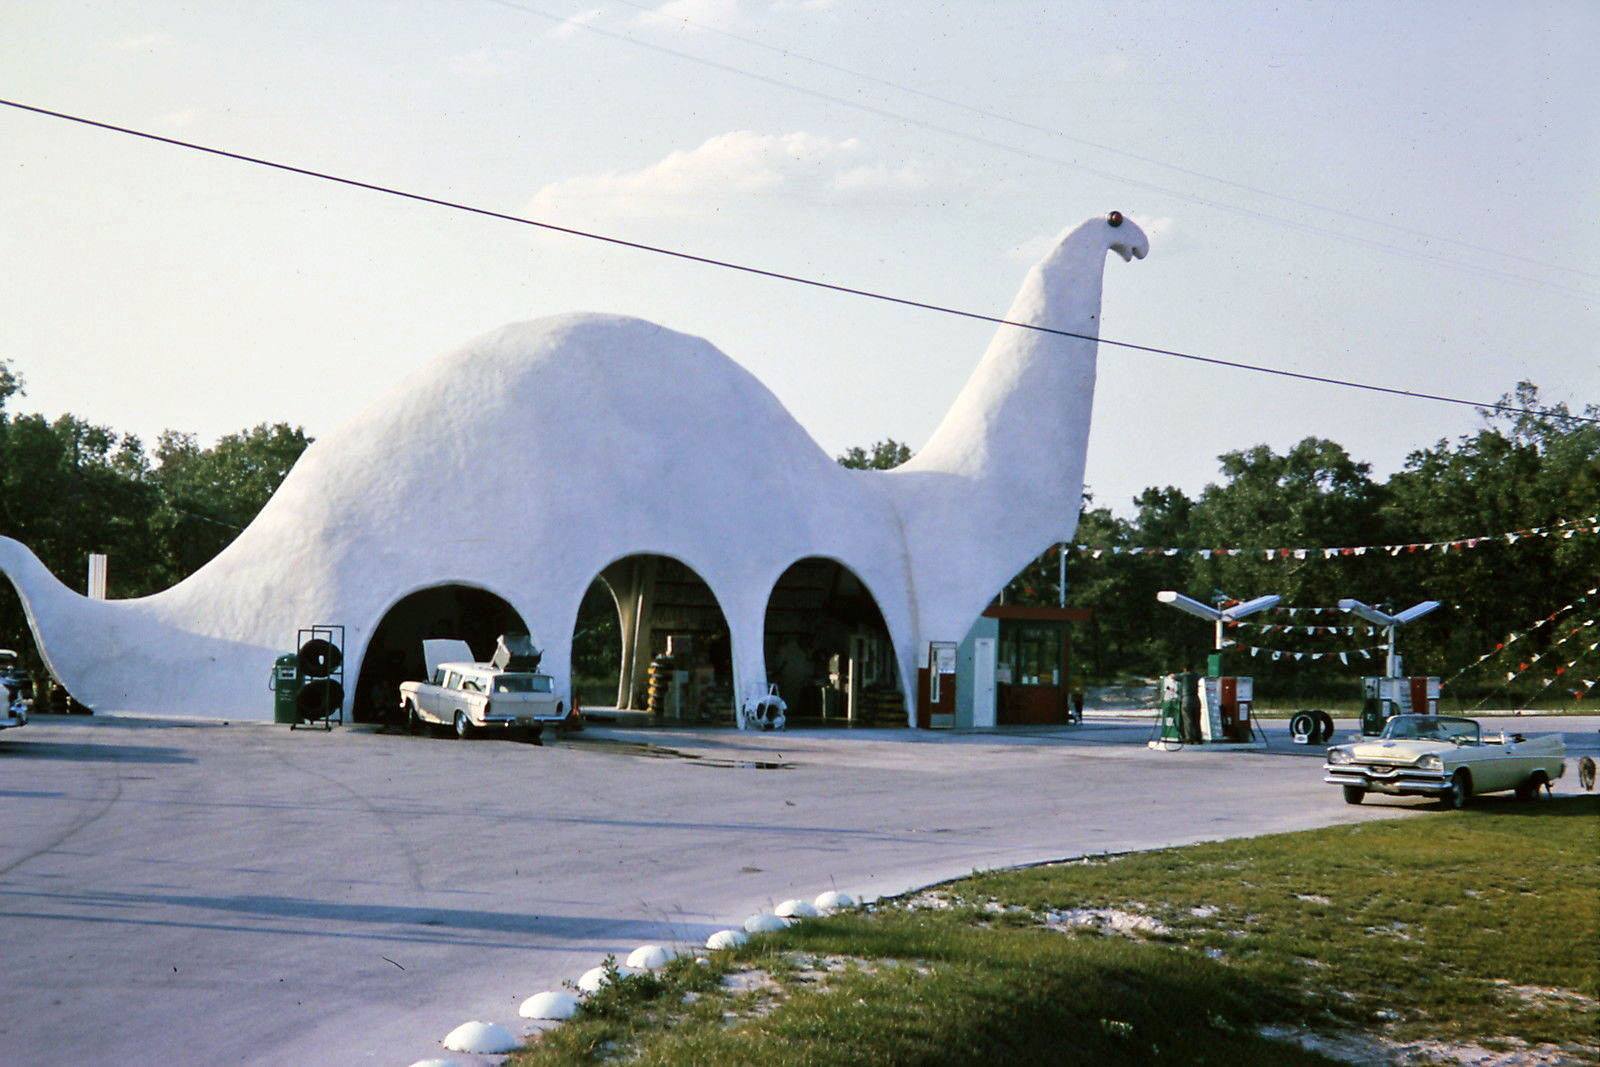 Sinclair Dino Service Station, Spring Hill, Florida, pictured in 1964